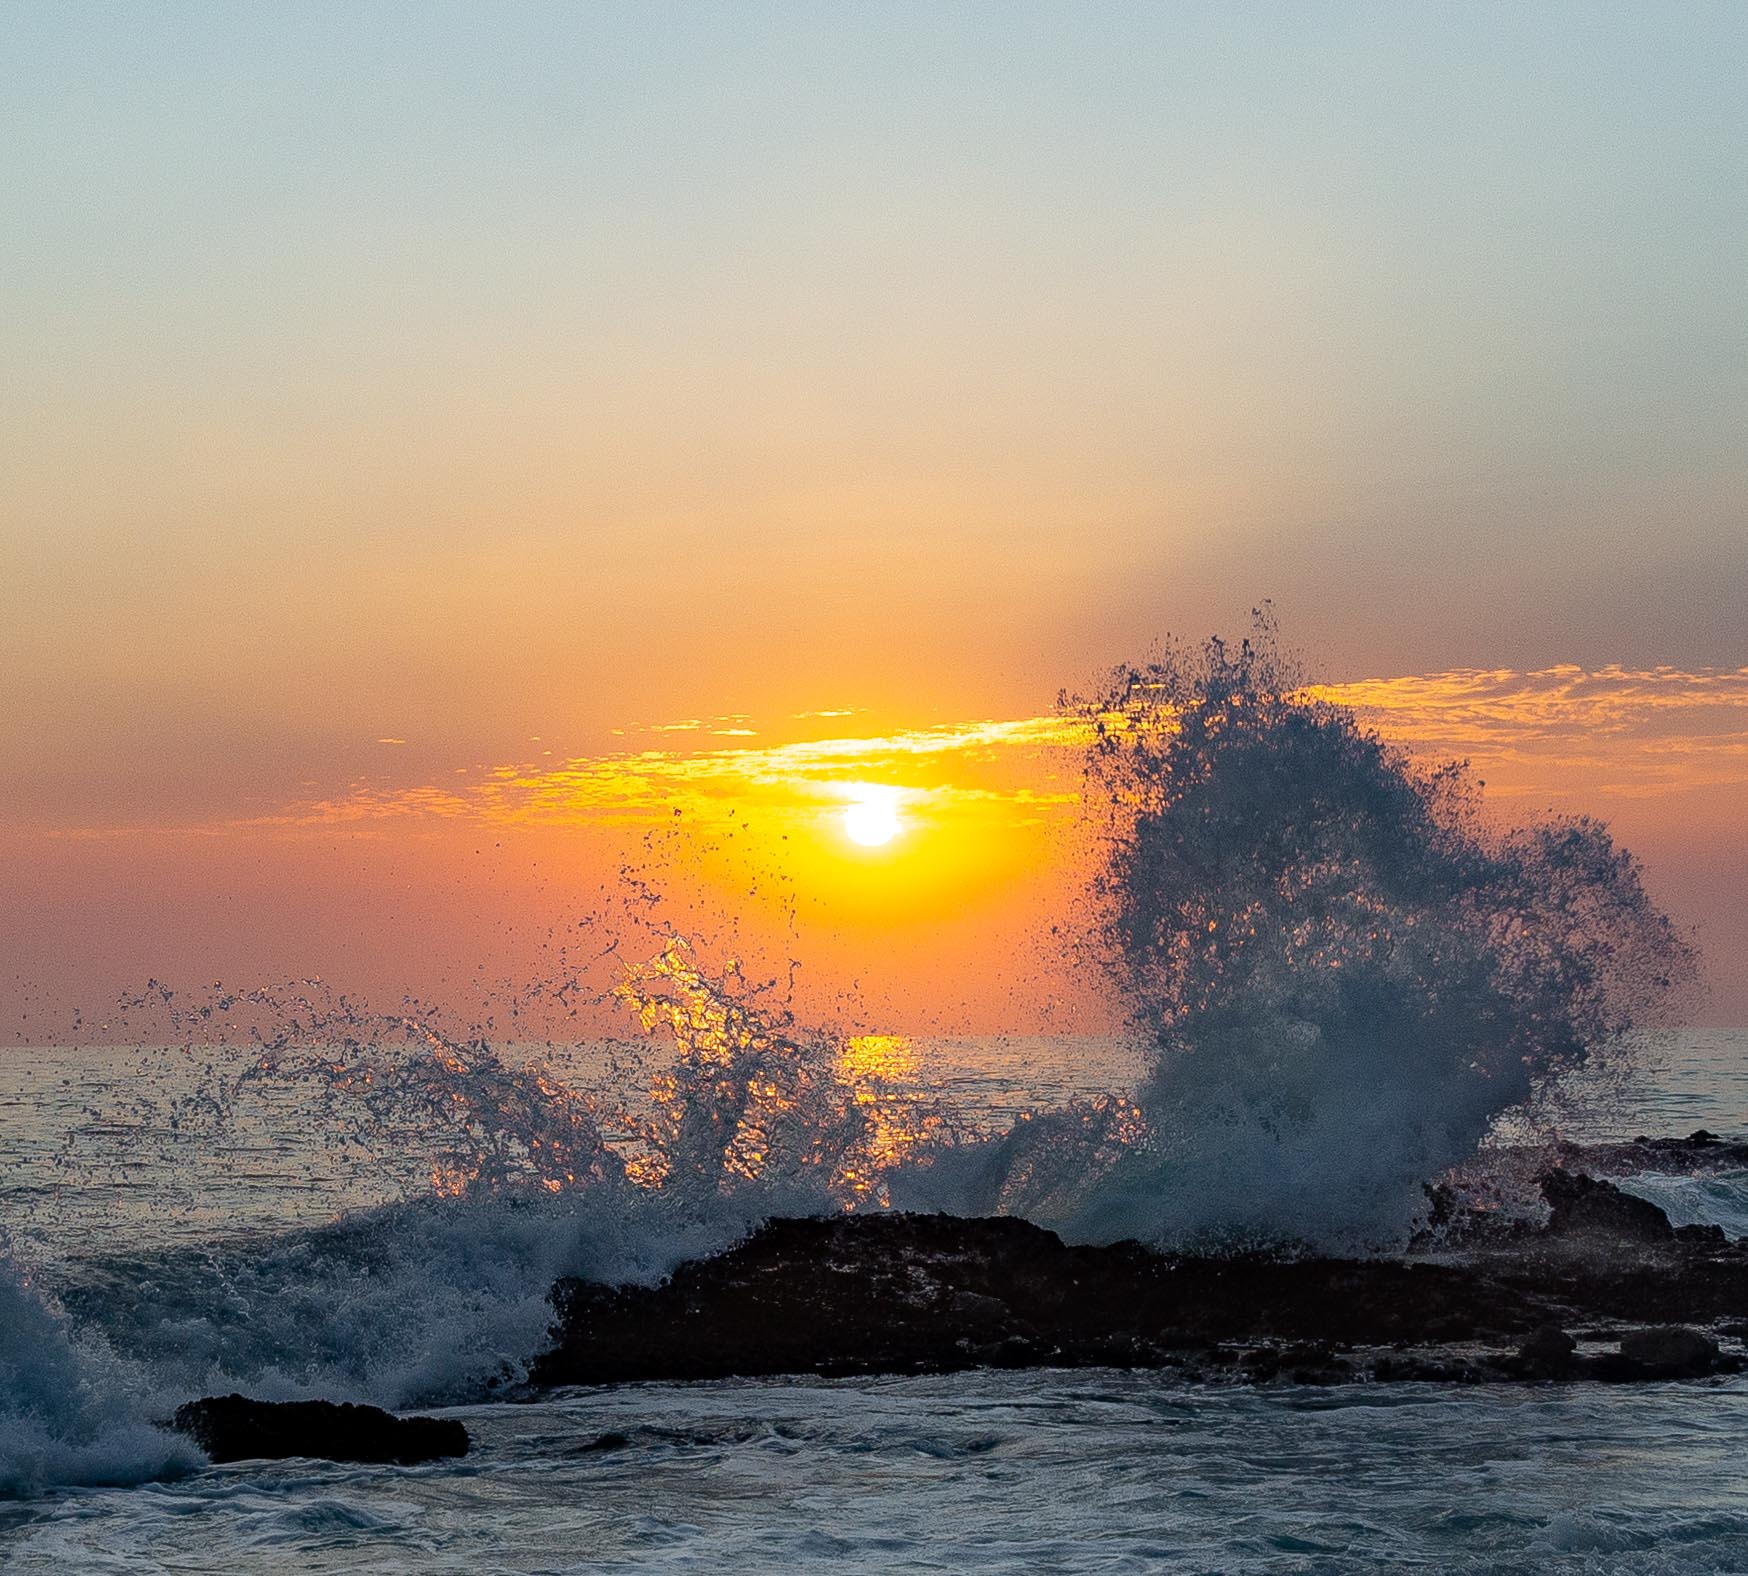 Some waves explode off of some rocks in front of a sunset.